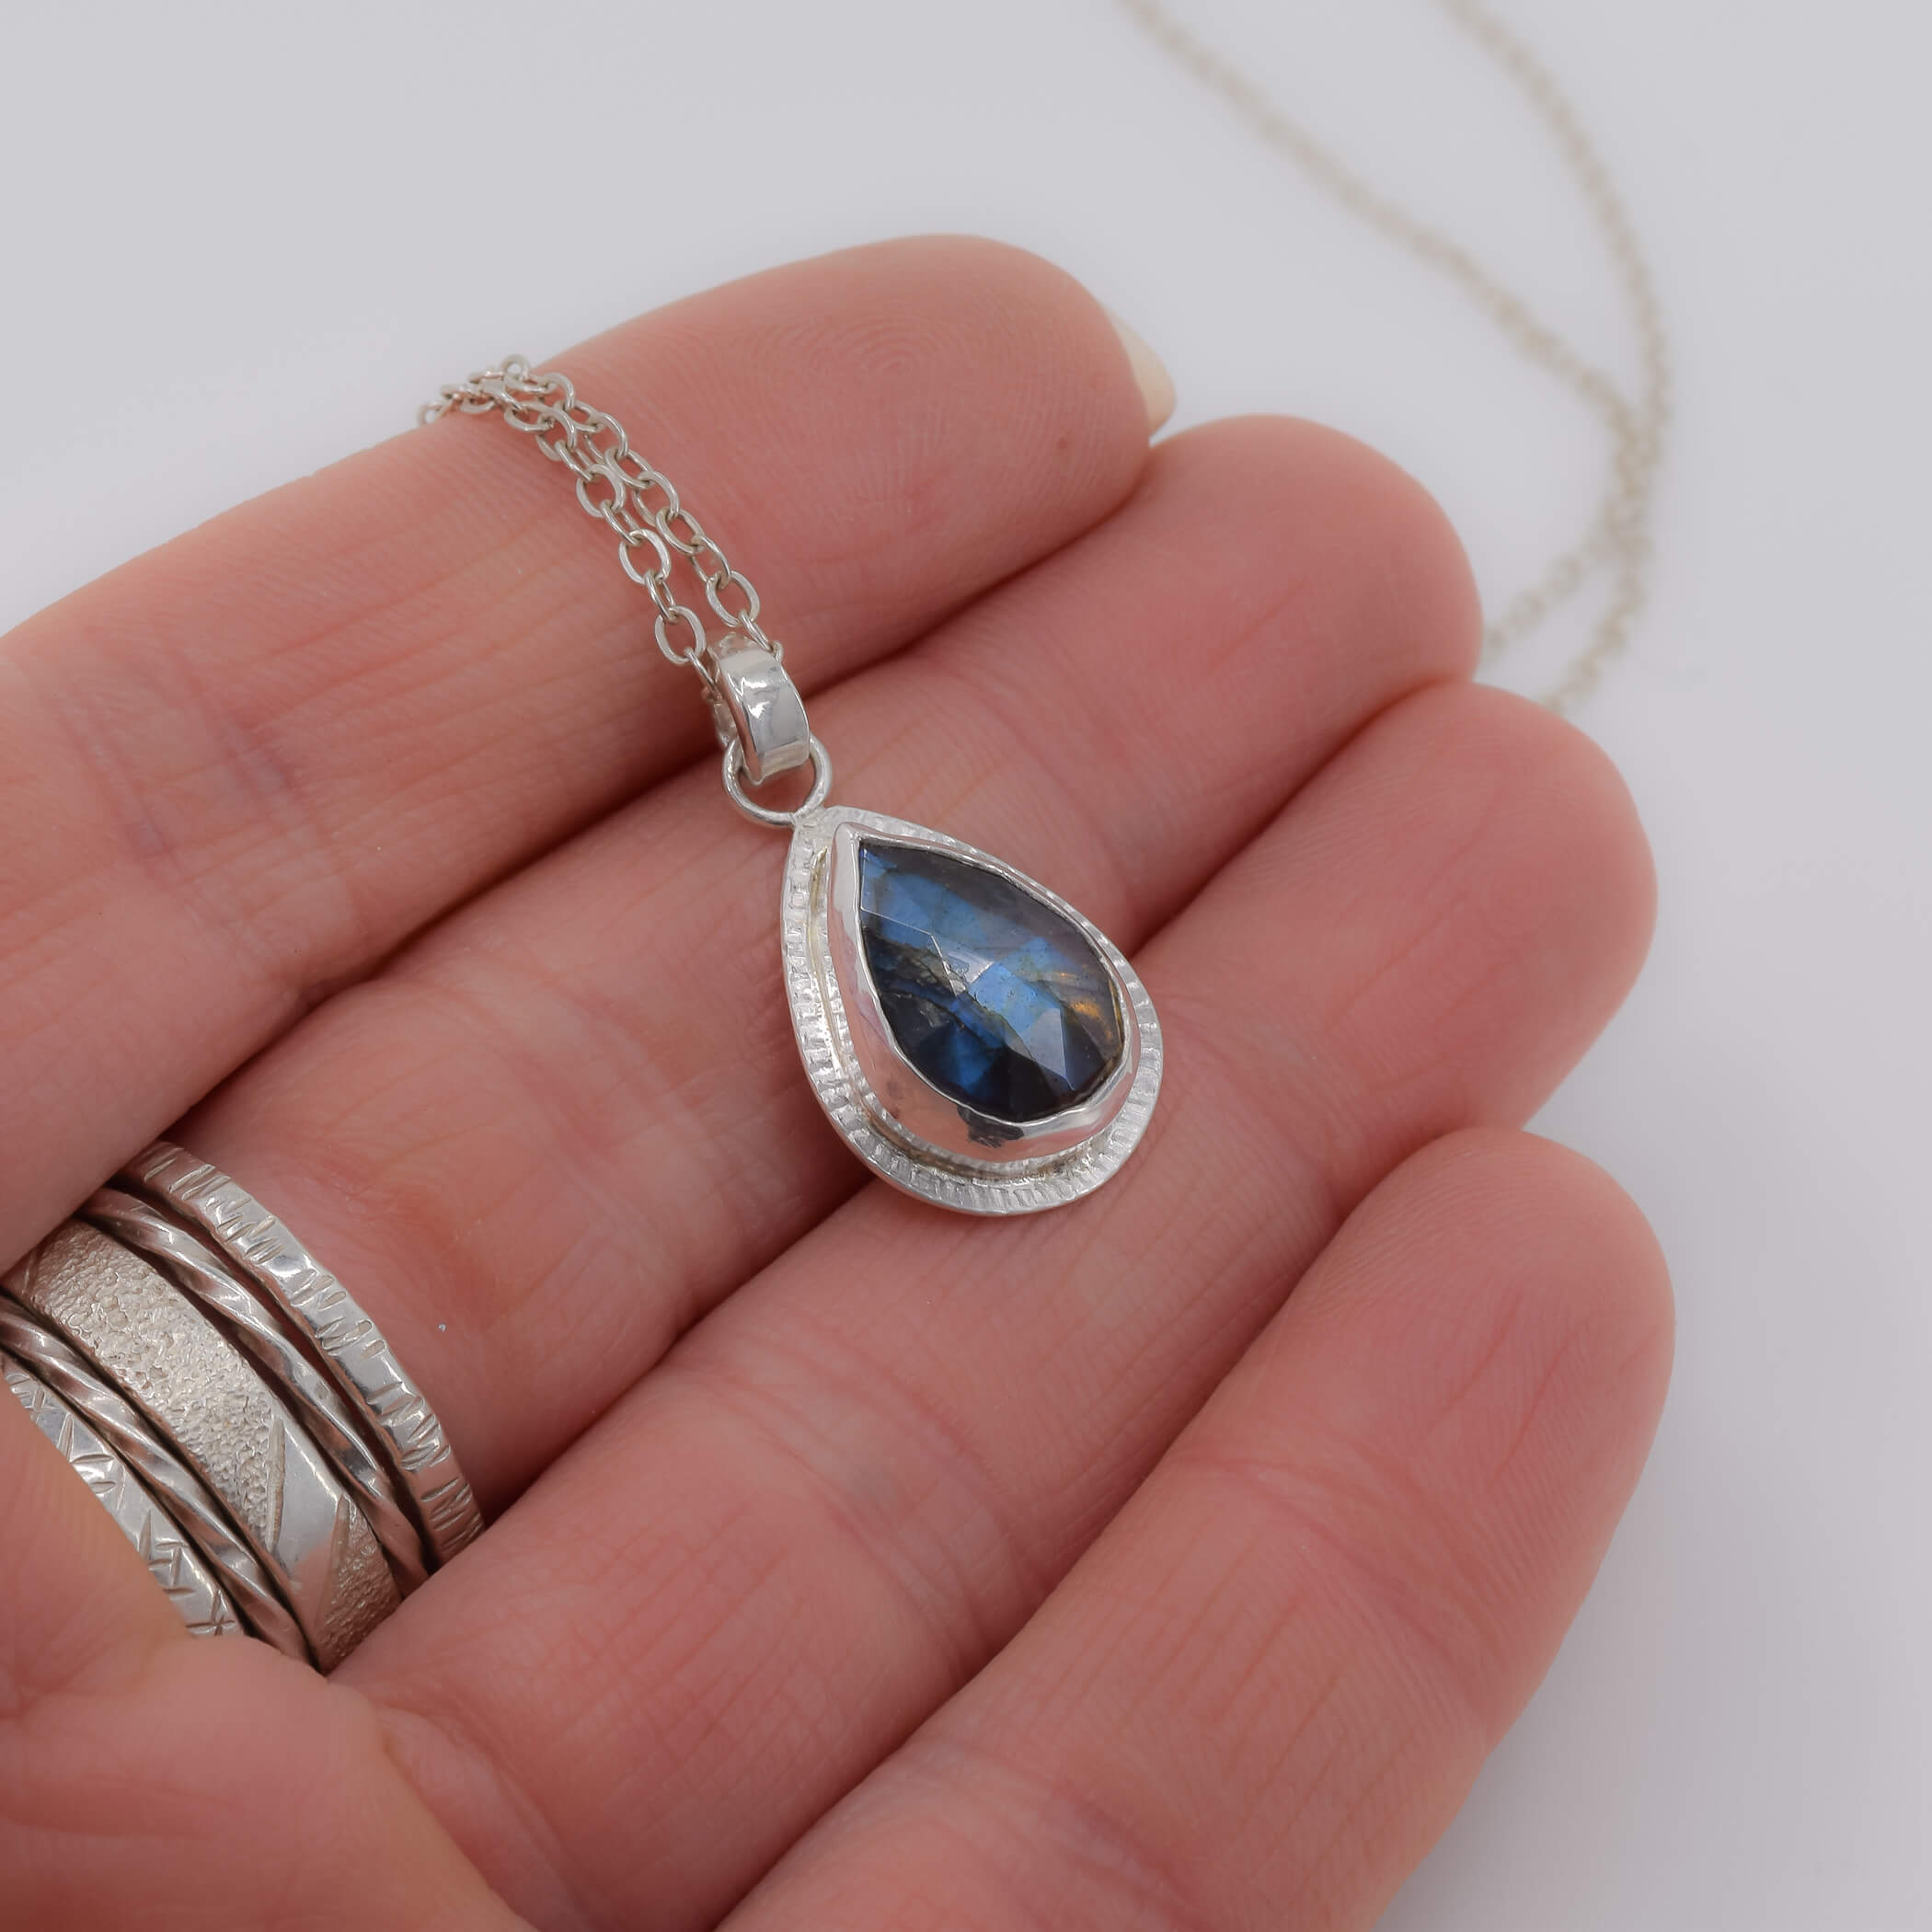 teardrop labradorite pendant necklace in sterling silver shown in hand for scale